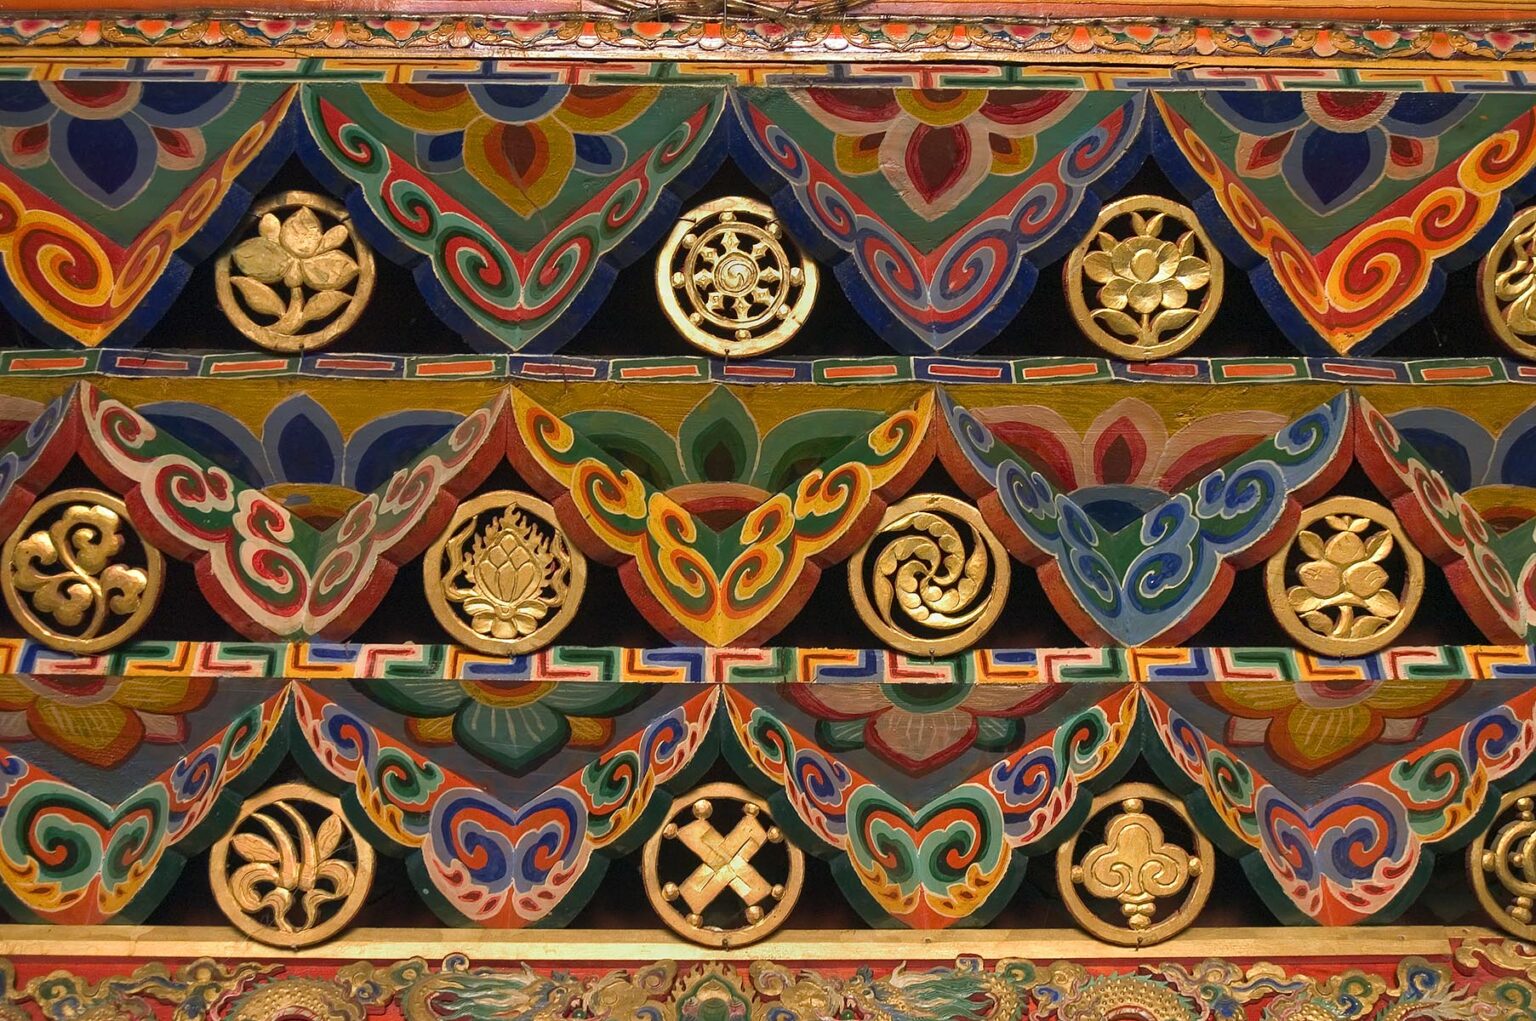 Ceiling detail with Buddhist lucky symbols inside Tagong (Lhagong) Monastery - Kham (E. Tibet), Sichuan Province, China